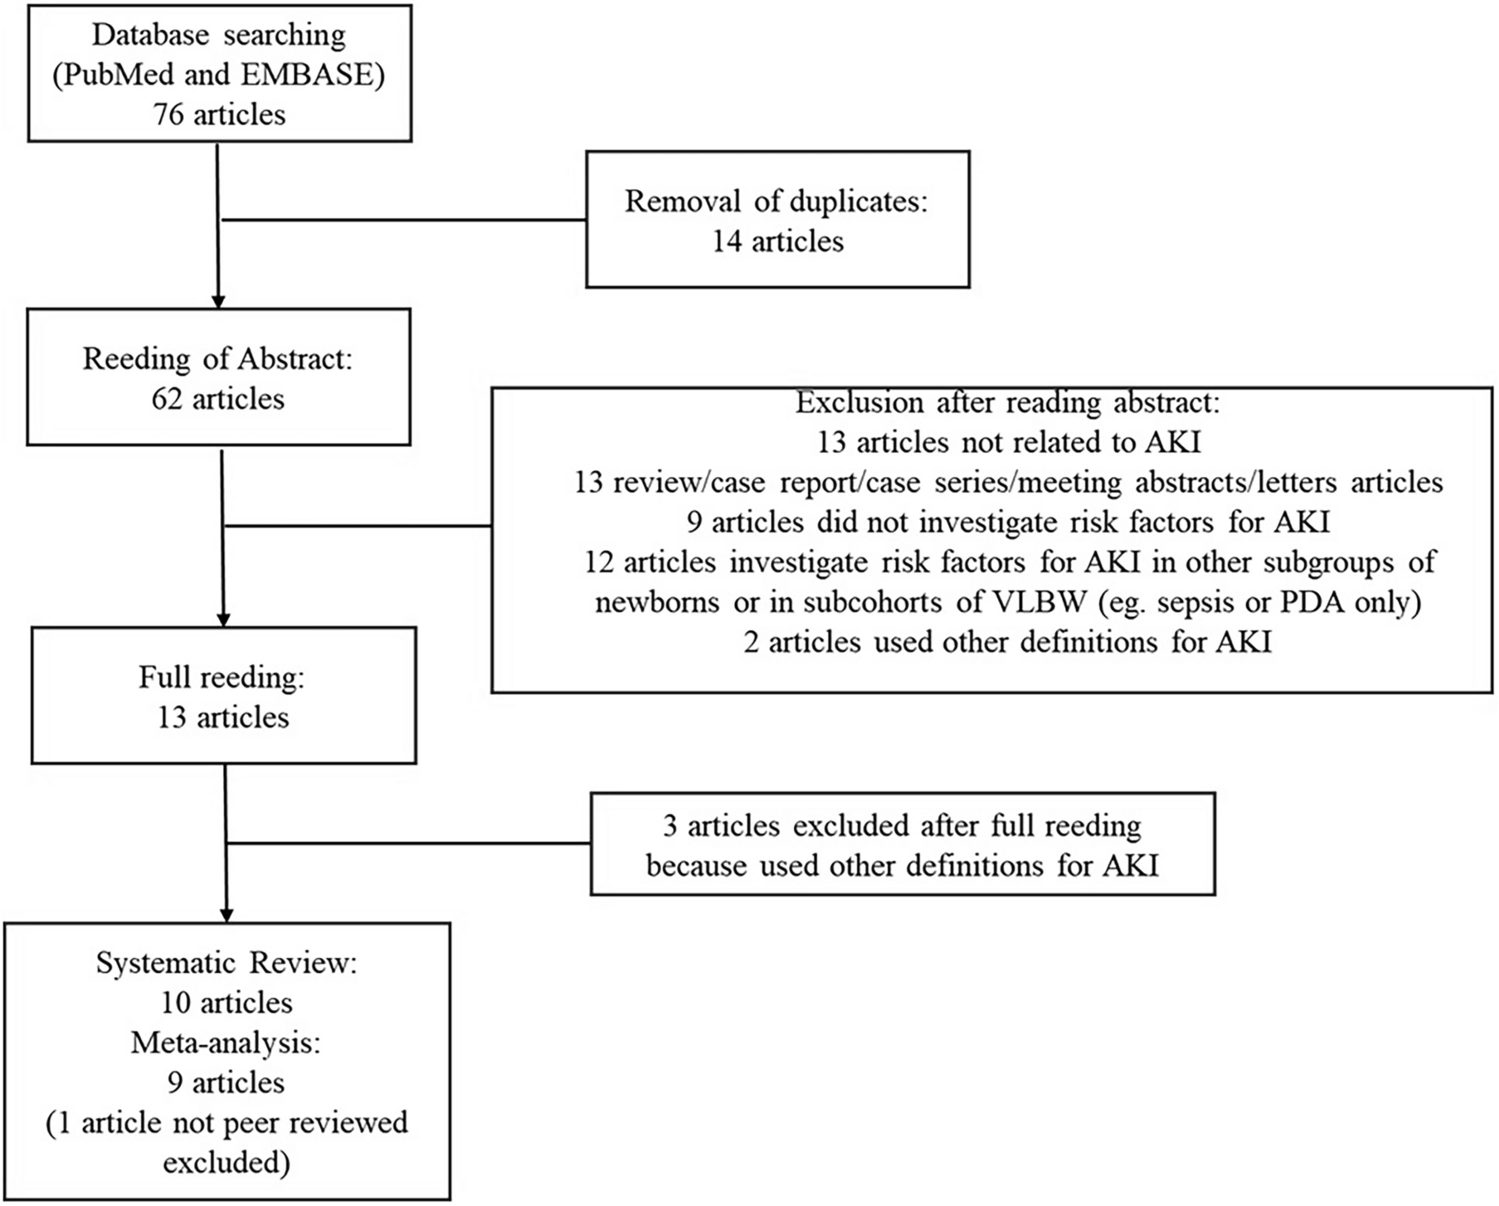 Risk factors for acute kidney injury in very-low birth weight newborns: a systematic review with meta-analysis